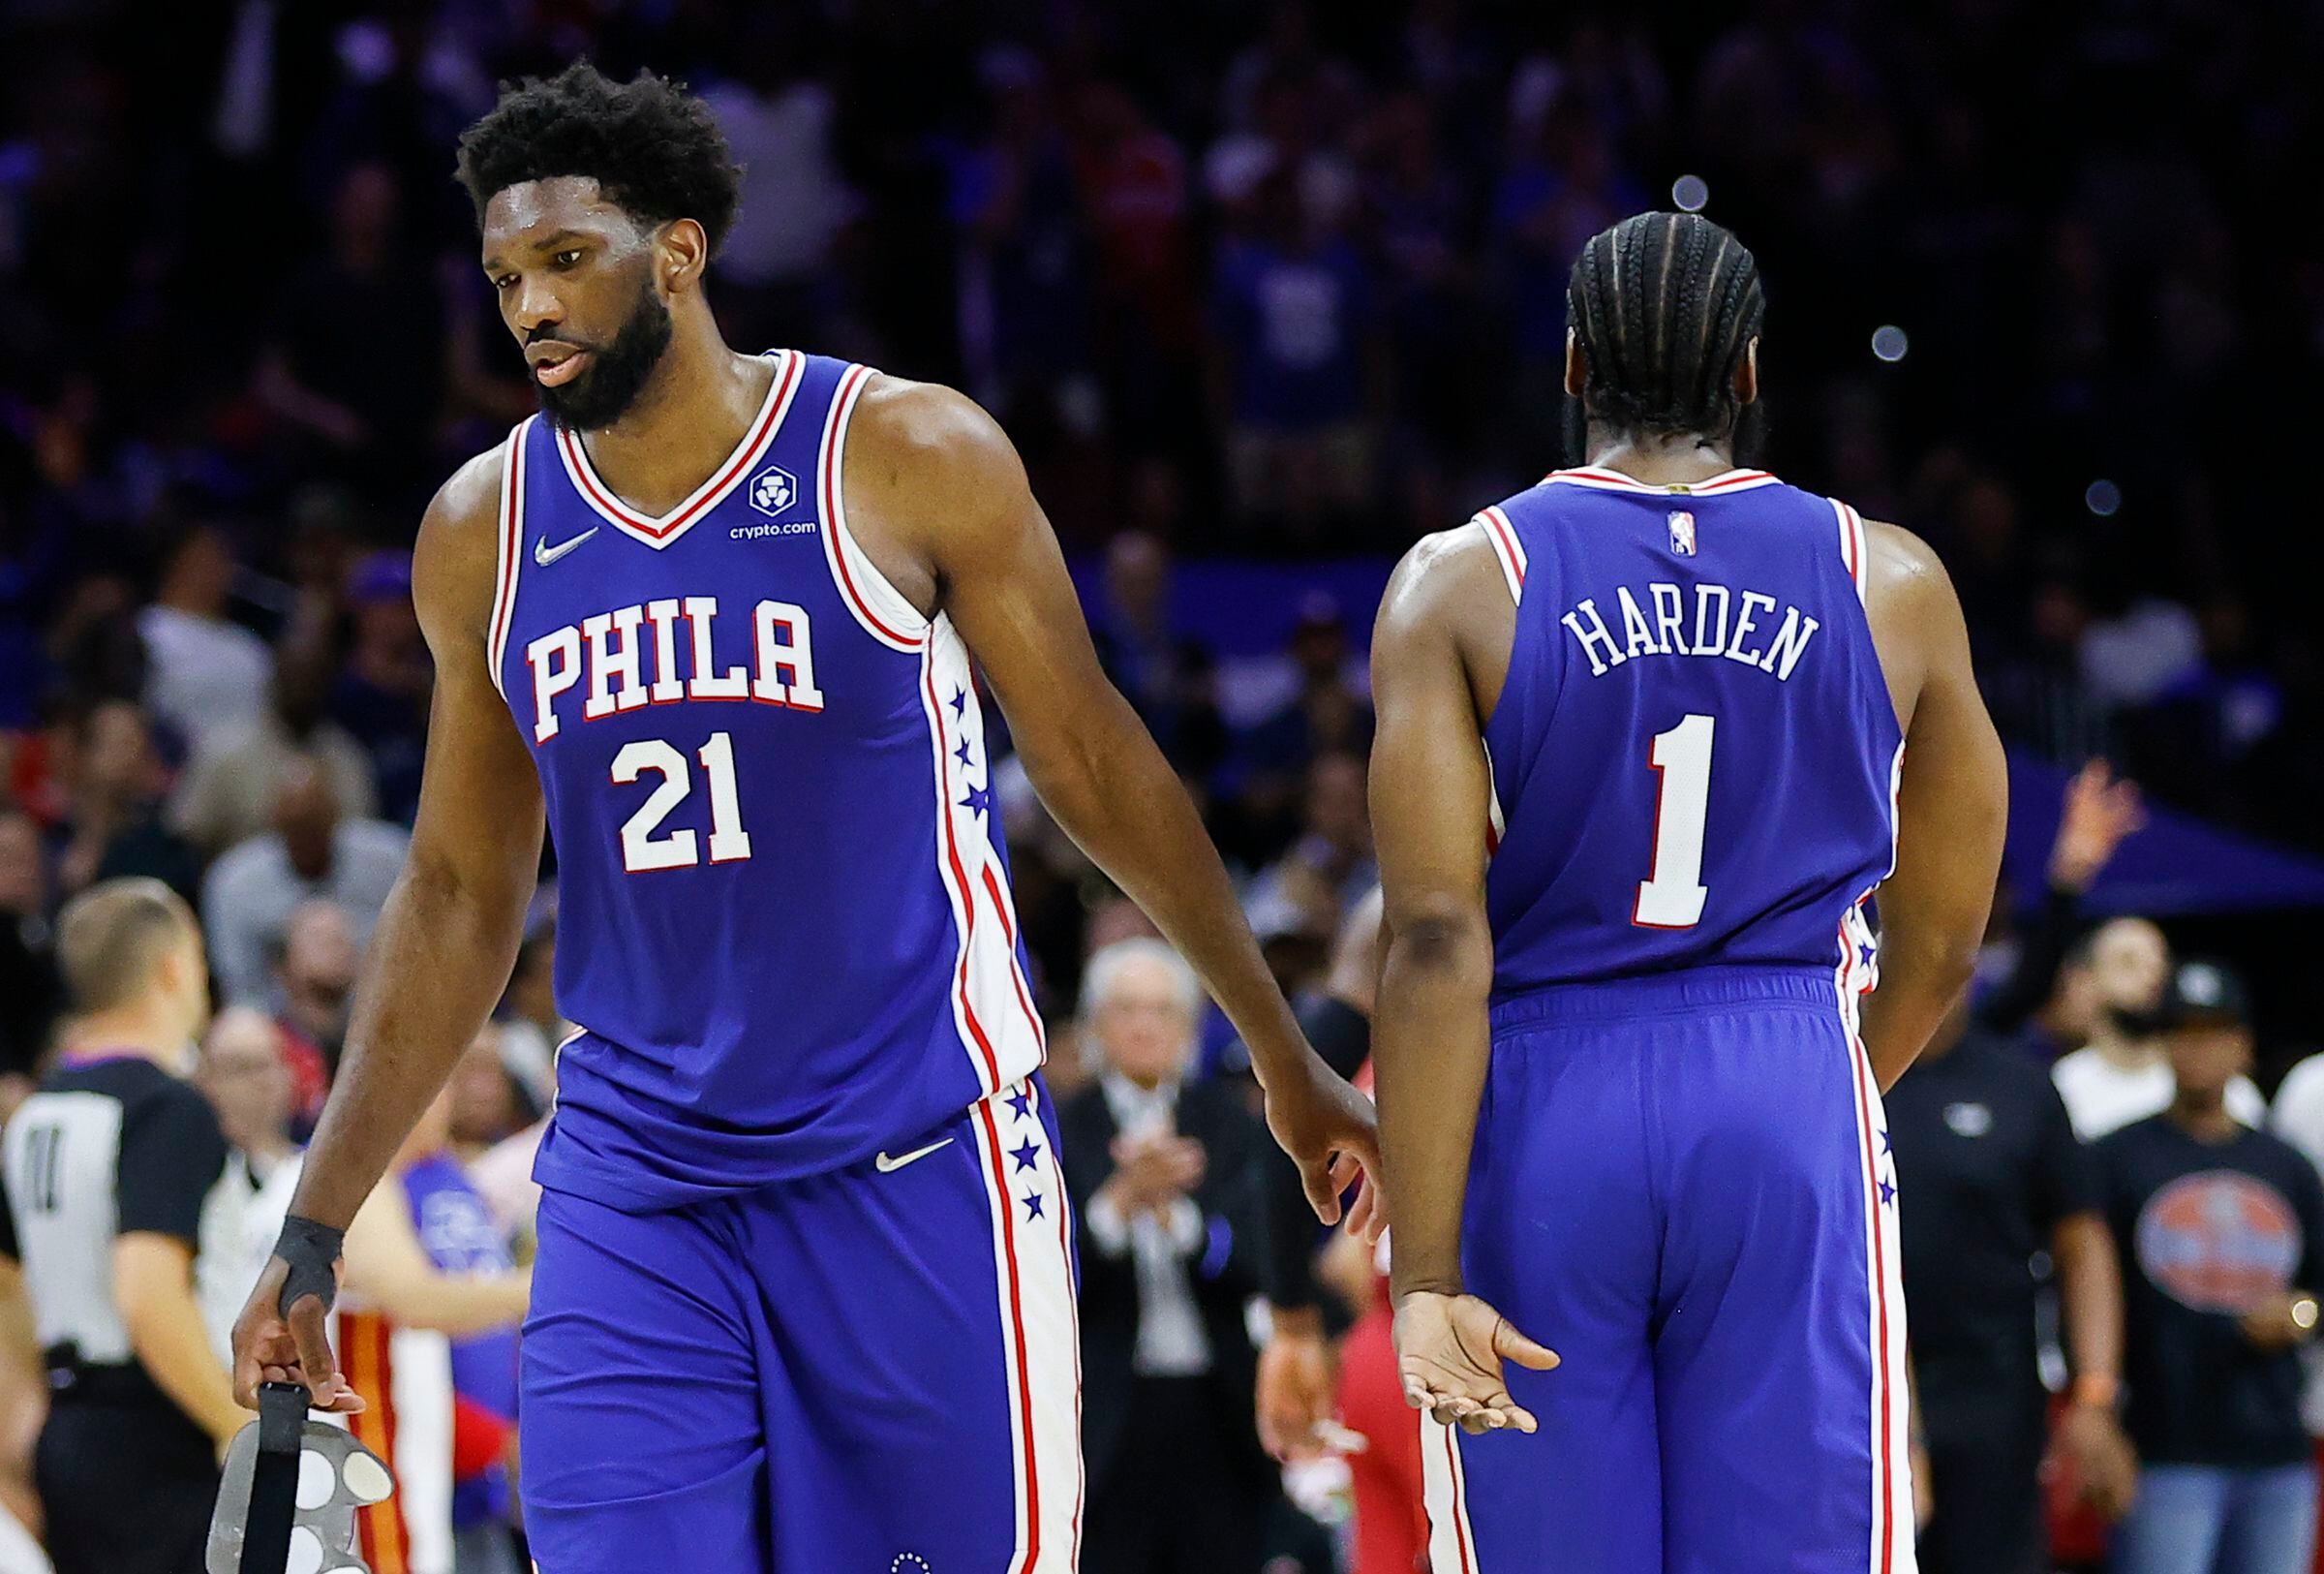 Joel Embiid does not dwell on postseason injuries, says Sixers must get  tougher after second-round exit